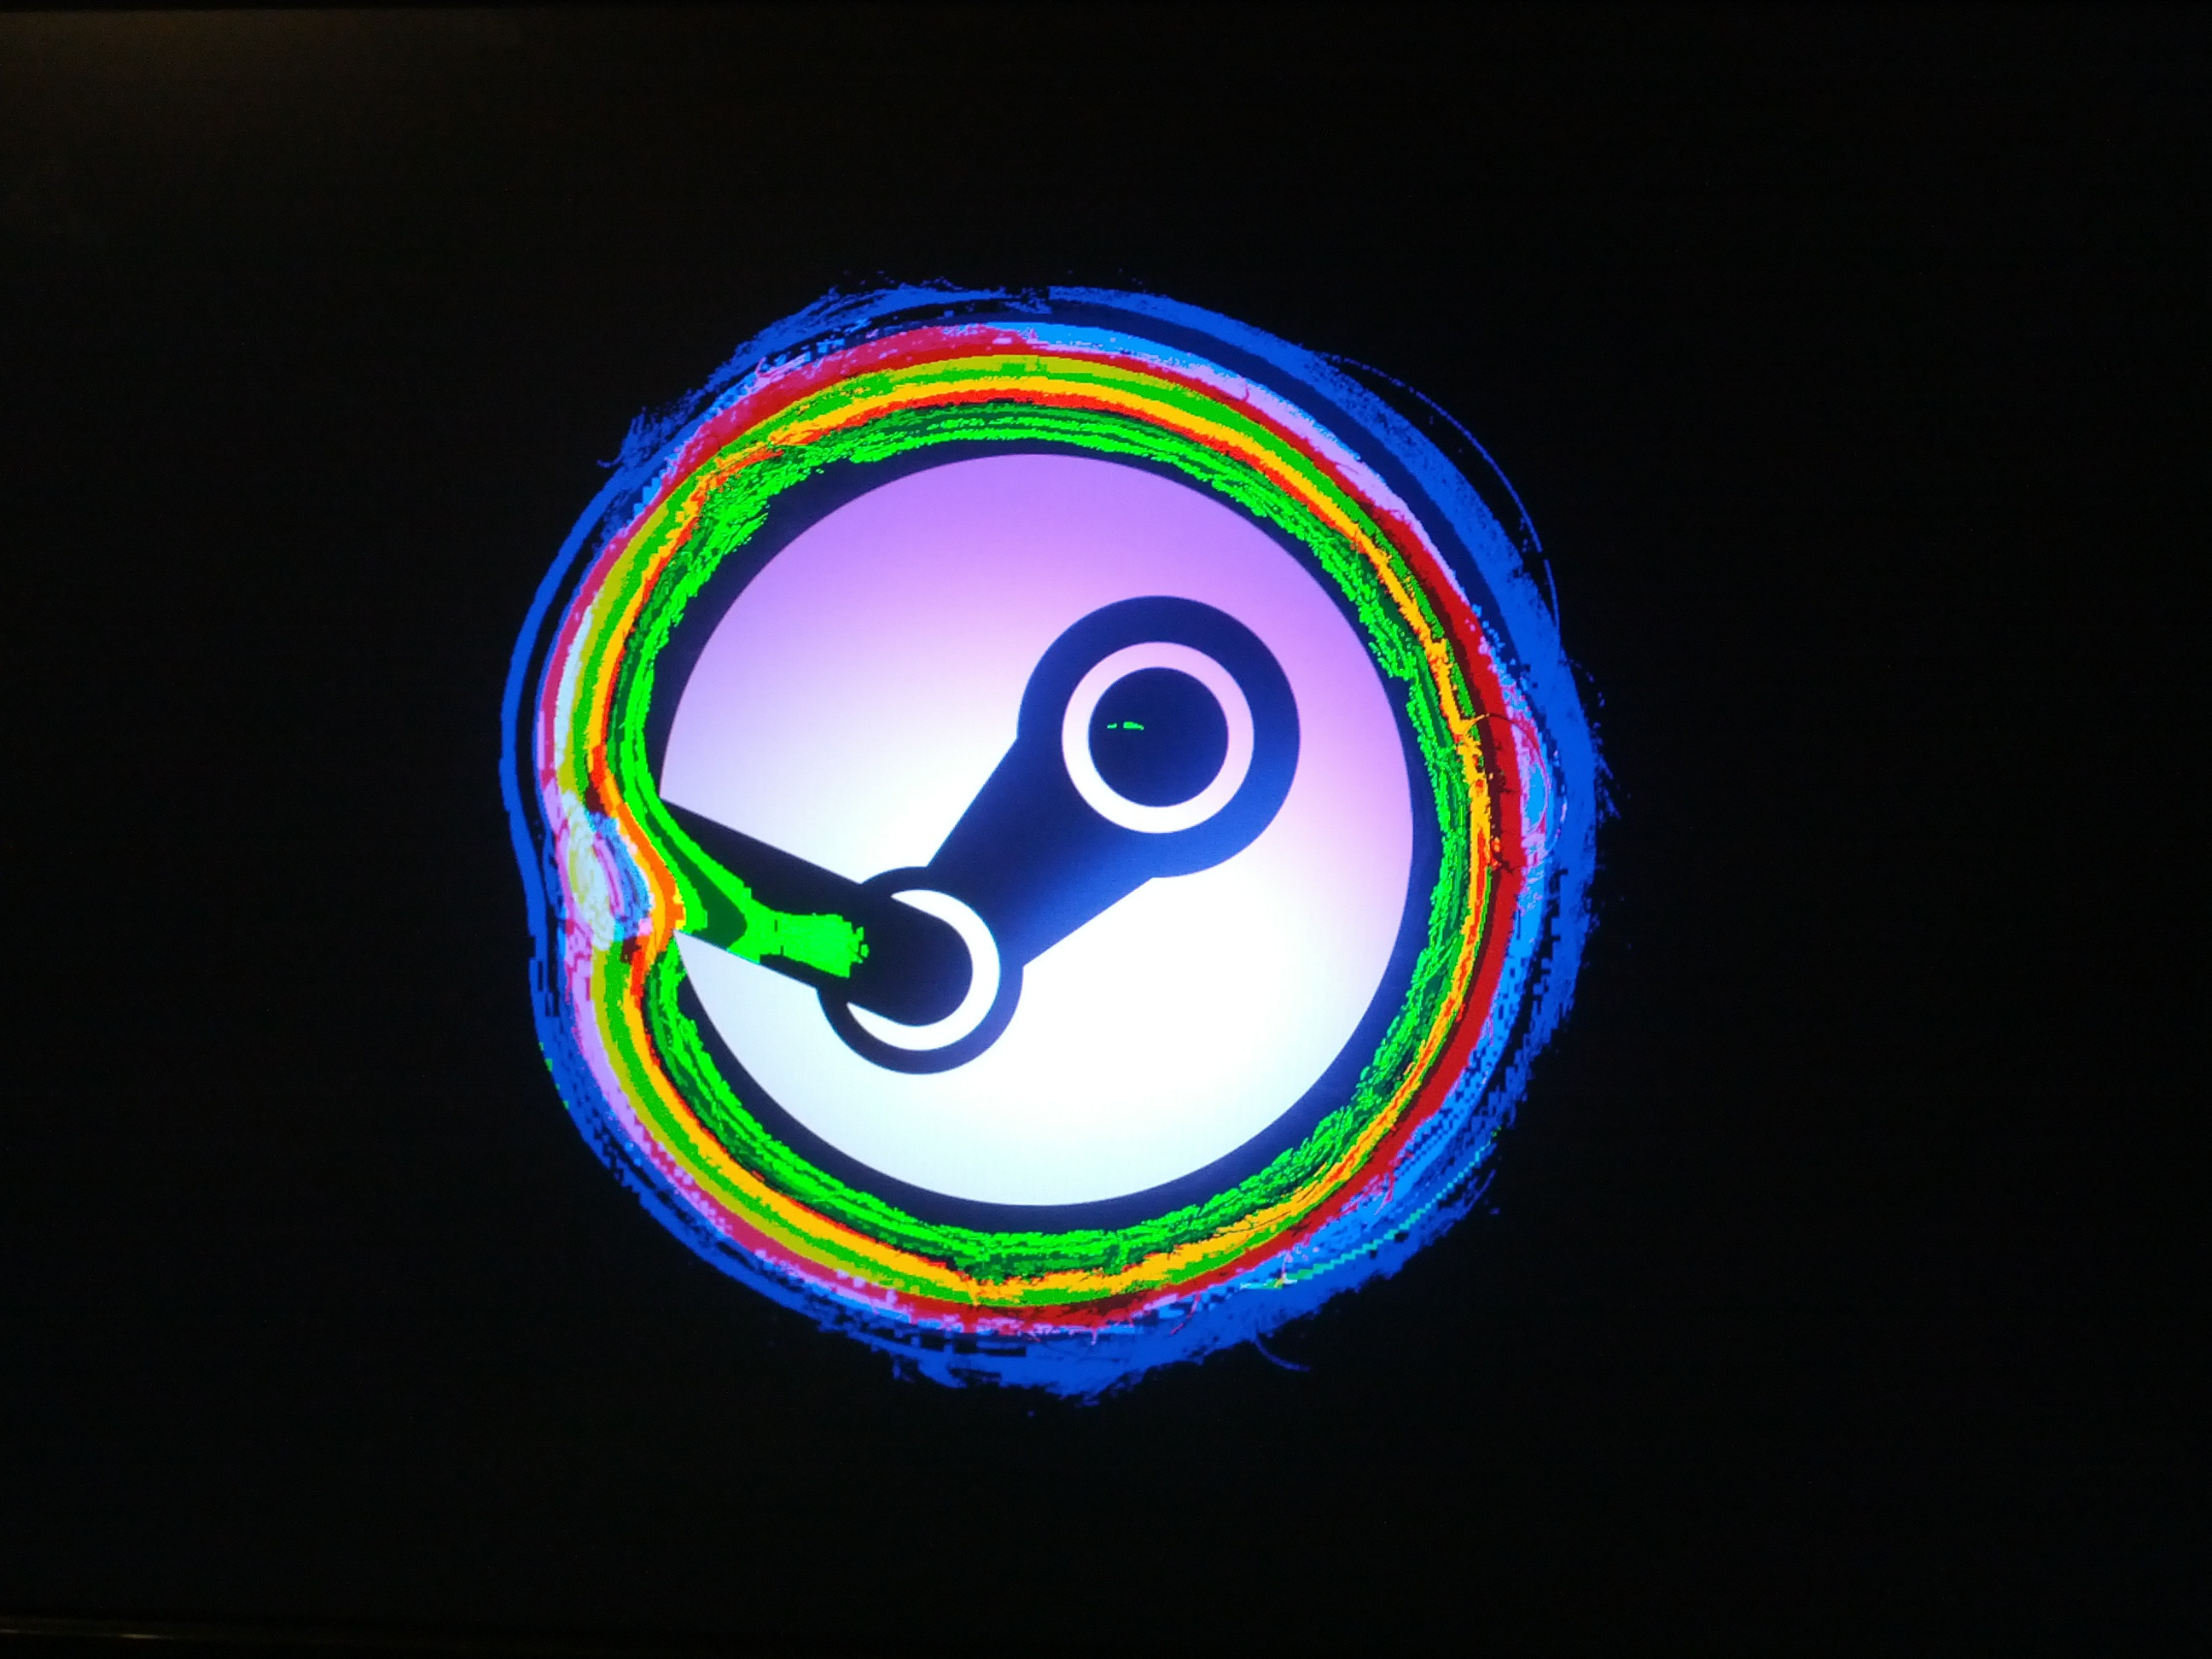 While messing with my current Steambox this boot image showed up. I now use it as my wallpaper